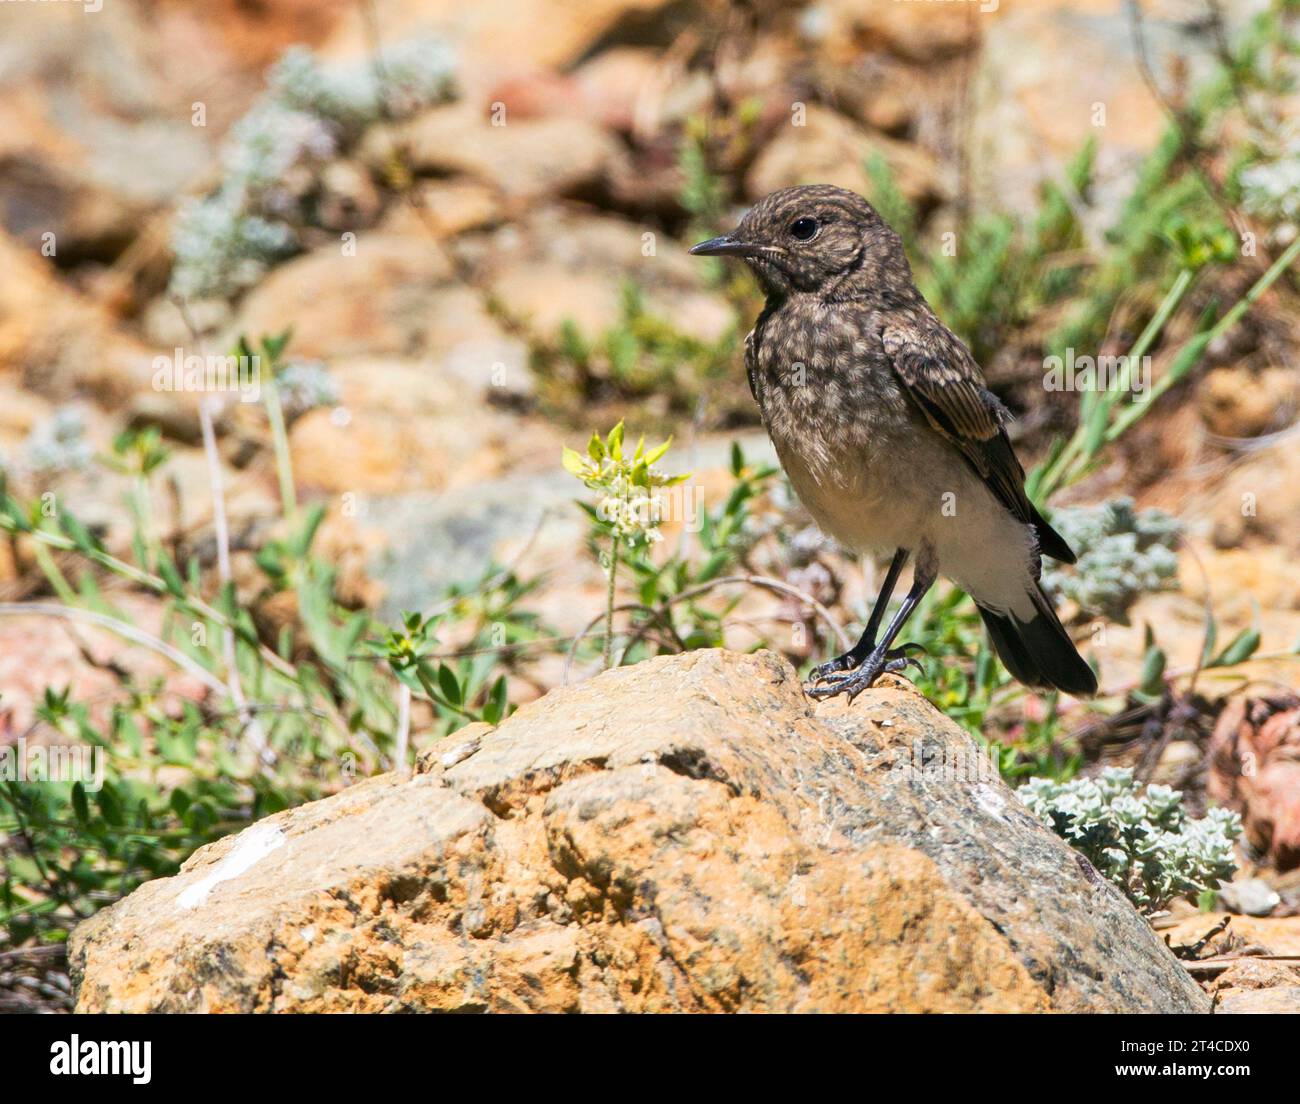 cyprus wheatear (Oenanthe cypriaca), young bird perching on a stone, side view, Cyprus Stock Photo